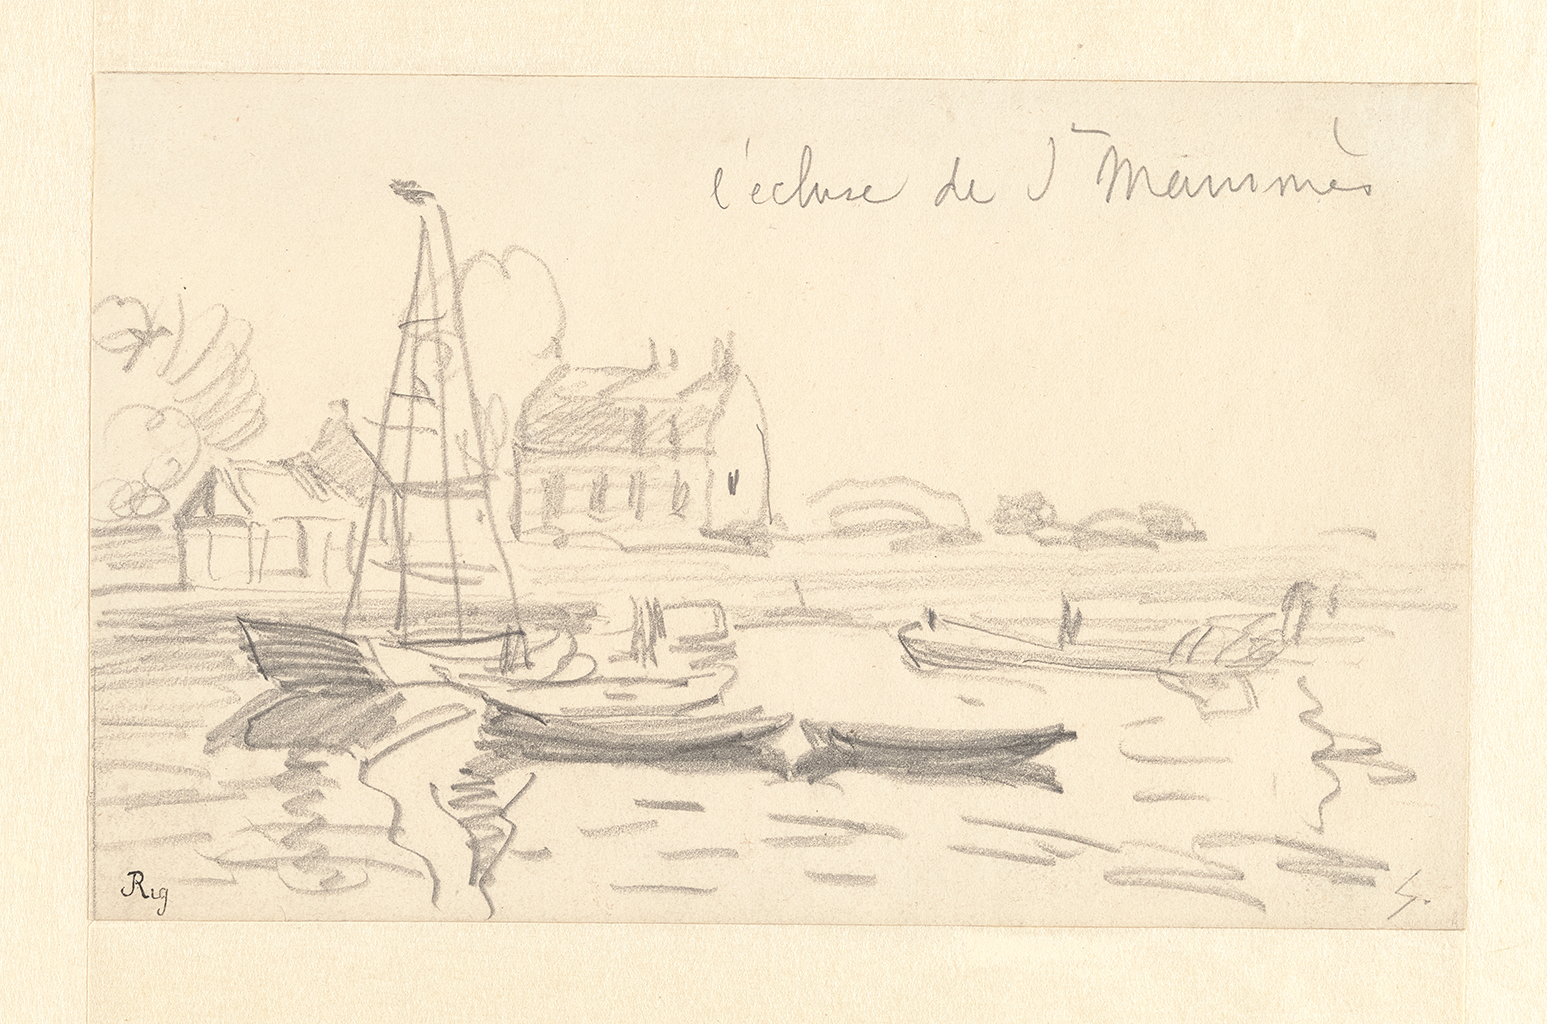 A sketch of three boats on a river near a dock. On the water are pencil markings mimicking waves. Behind them are two buildings and a rough outline of a trees. The sketch is made up with light shades of black chalk.